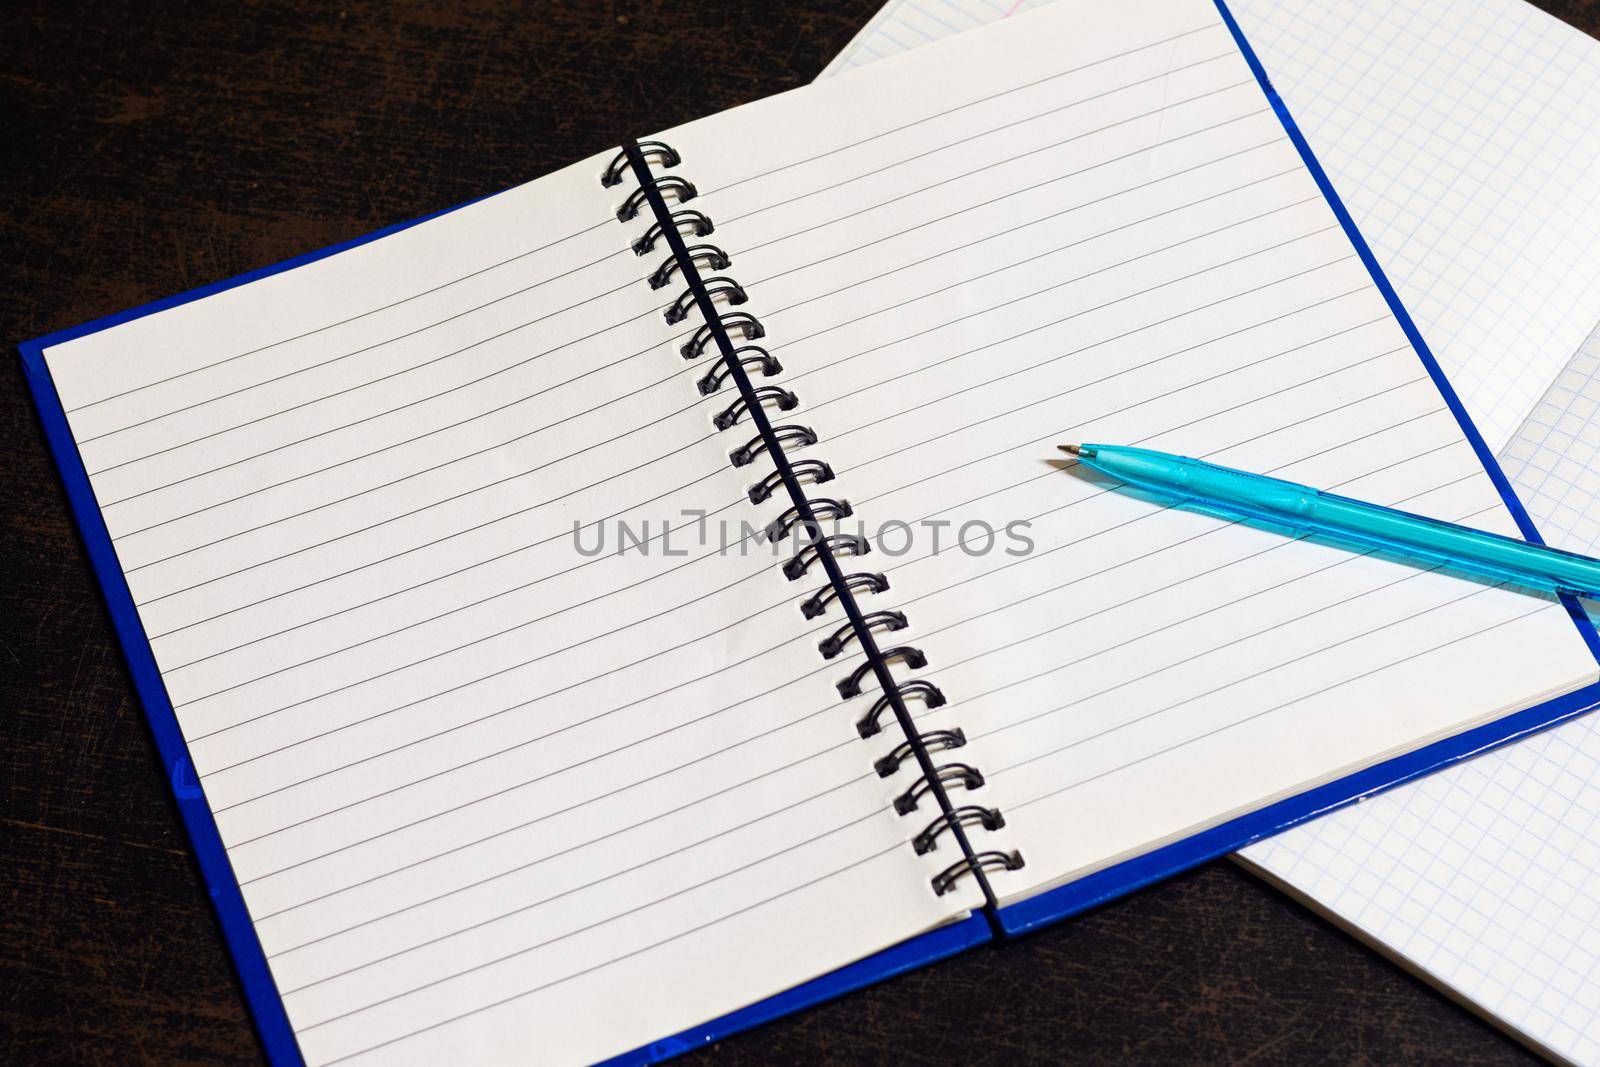 On the table is an open notebook on which lies a ballpoint pen